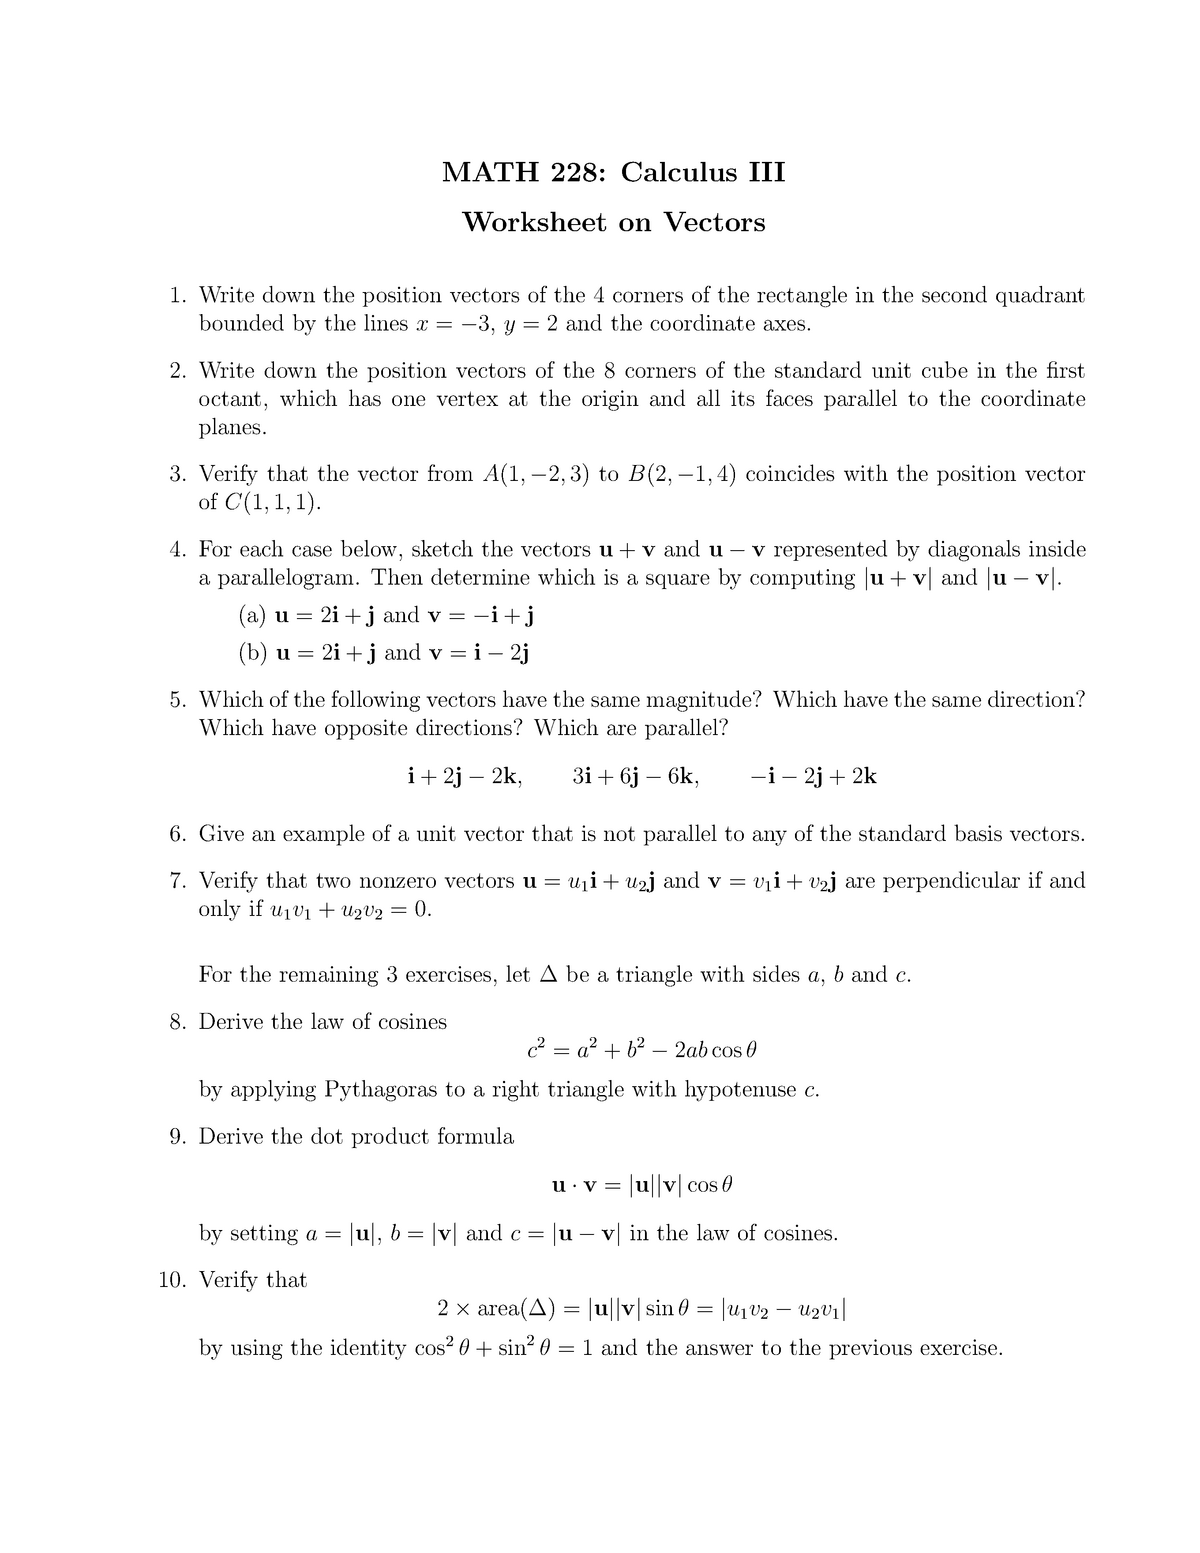 View How s Business Math Worksheet C 69 Pictures The Math